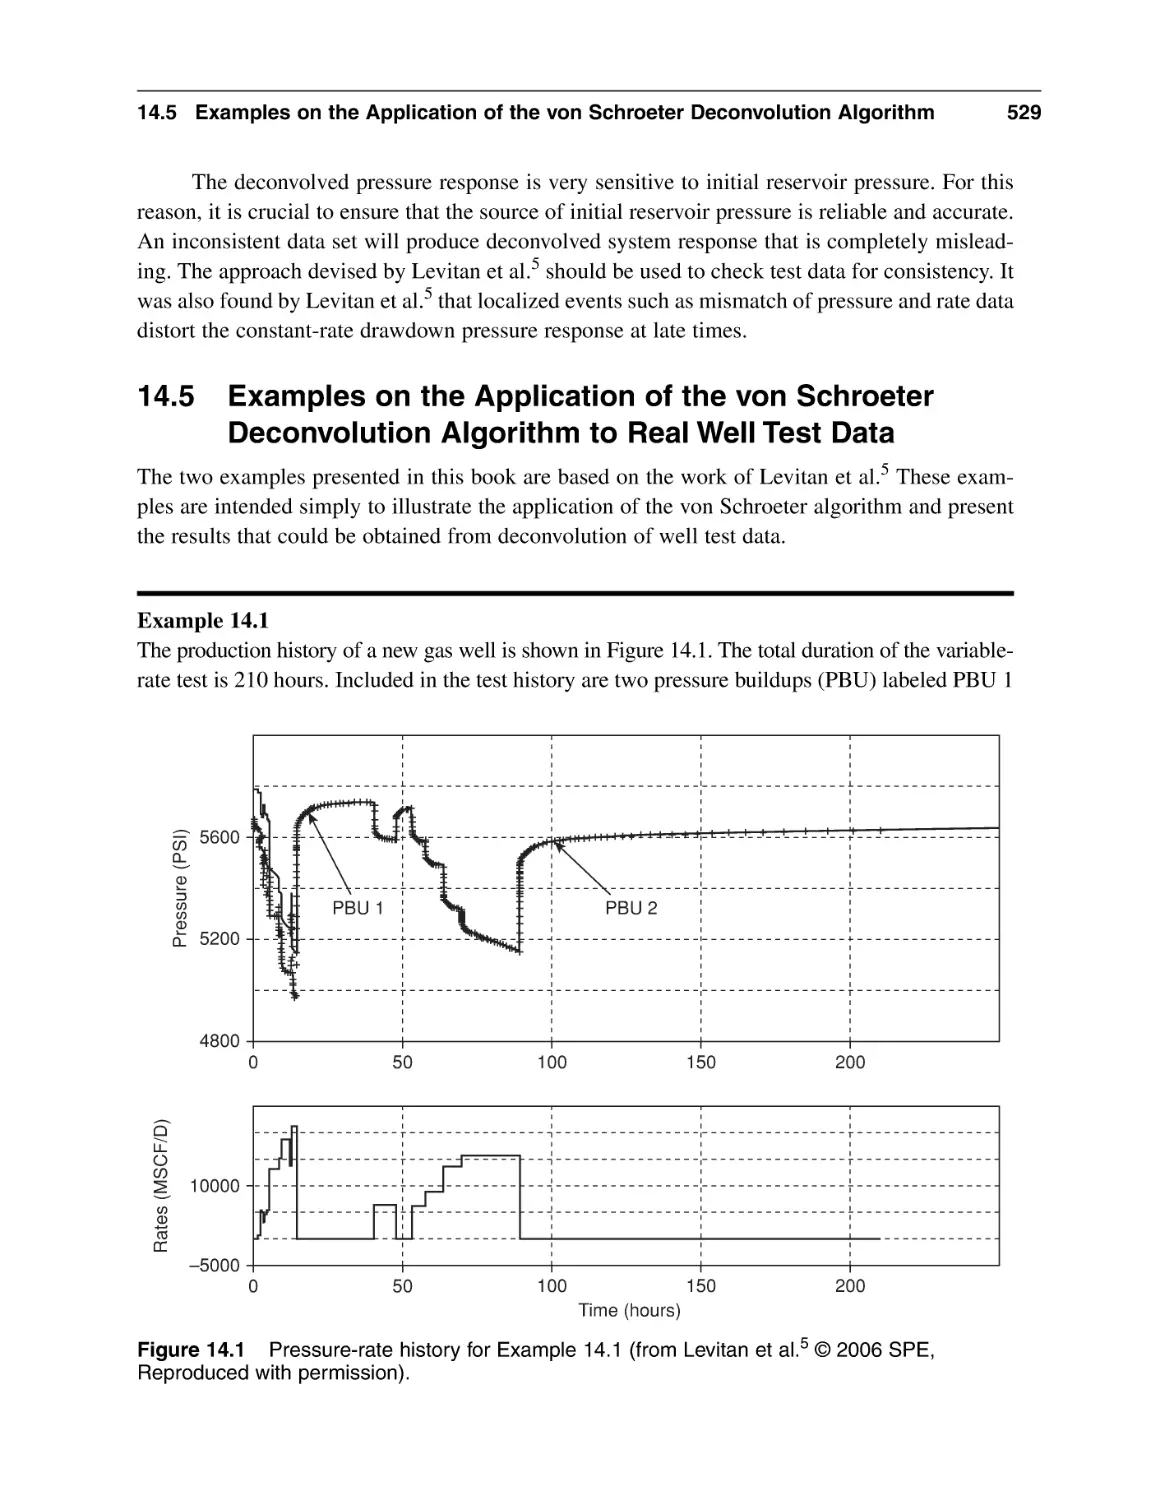 14.5 Examples on the Application of the von Schroeter Deconvolution Algorithm to Real Well Test Data